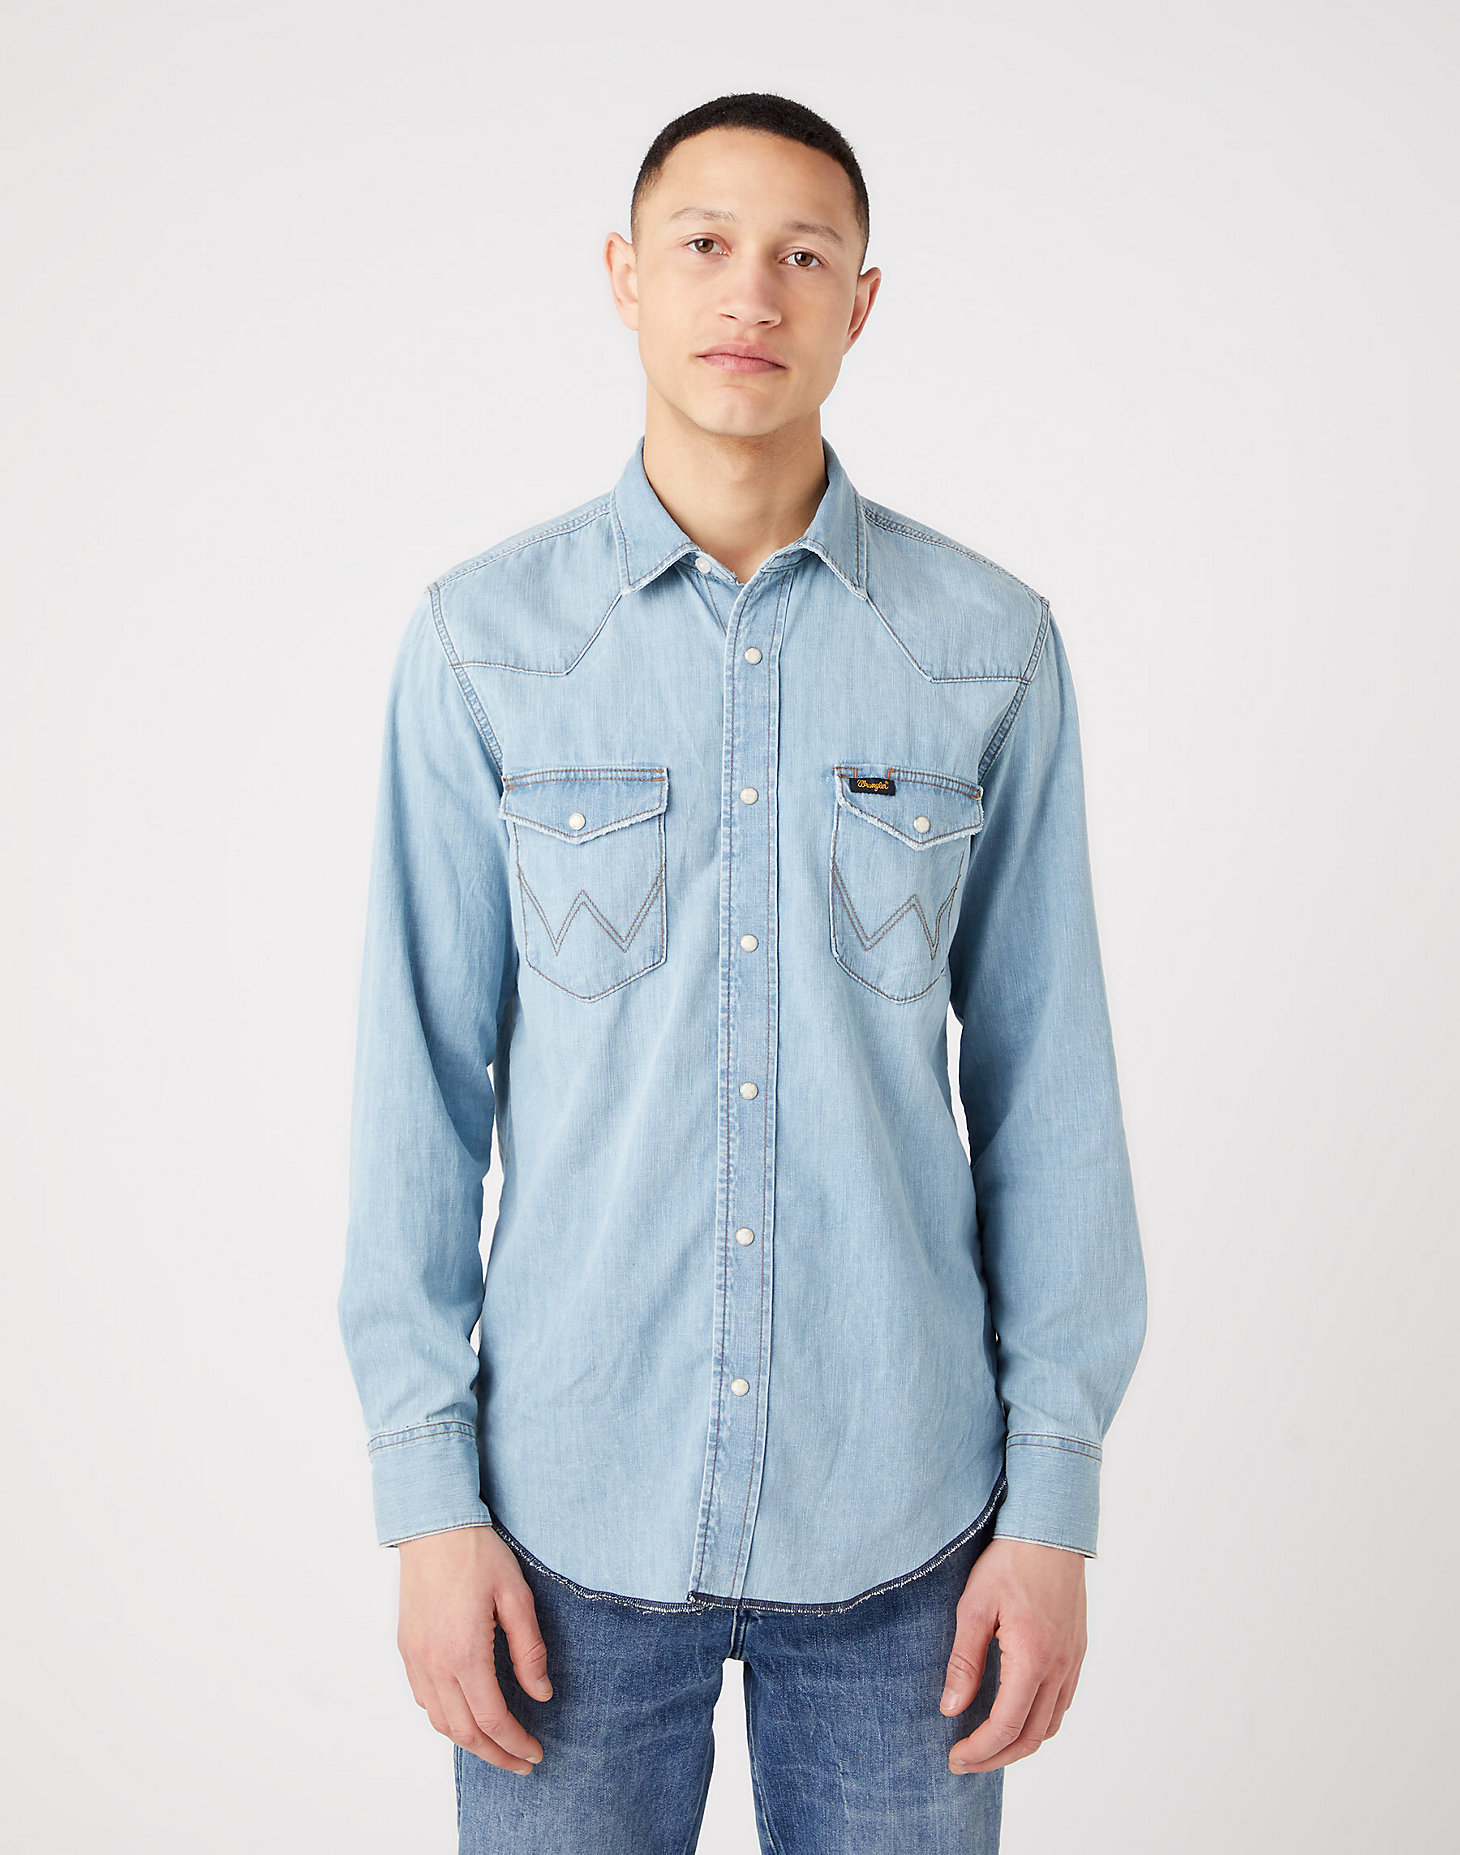 Long Sleeve Workshirt in Icy Blue main view